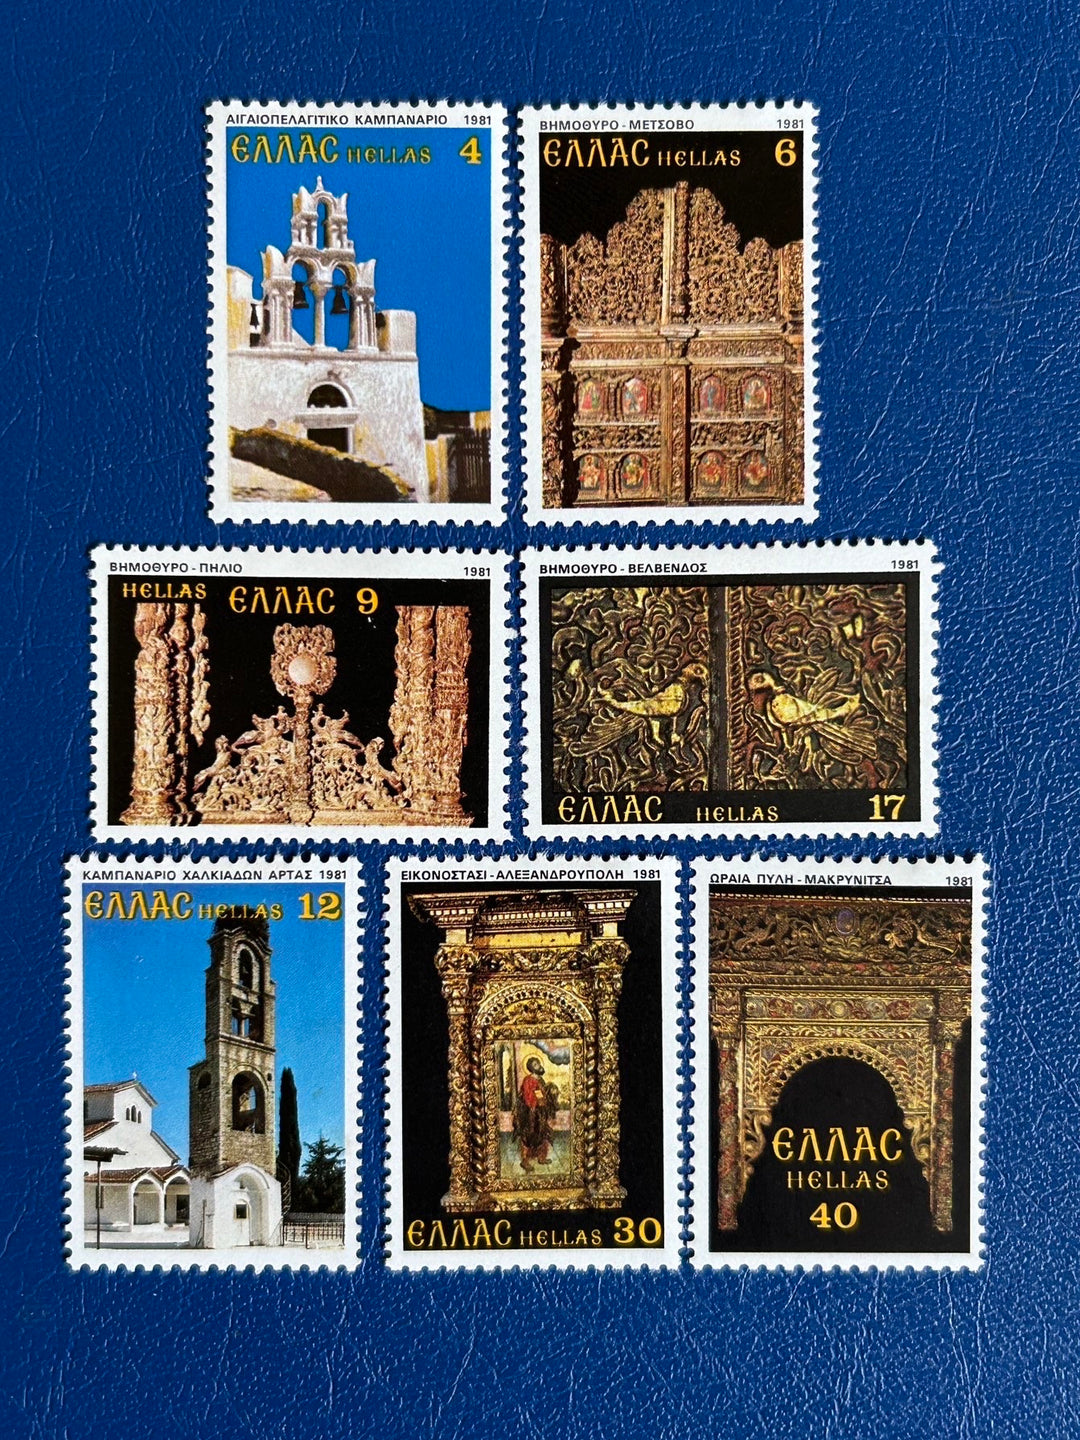 Greece - Original Vintage Postage Stamps- 1981 - Bell Towers & Carved Altar Screens - for the collector, artist or crafter